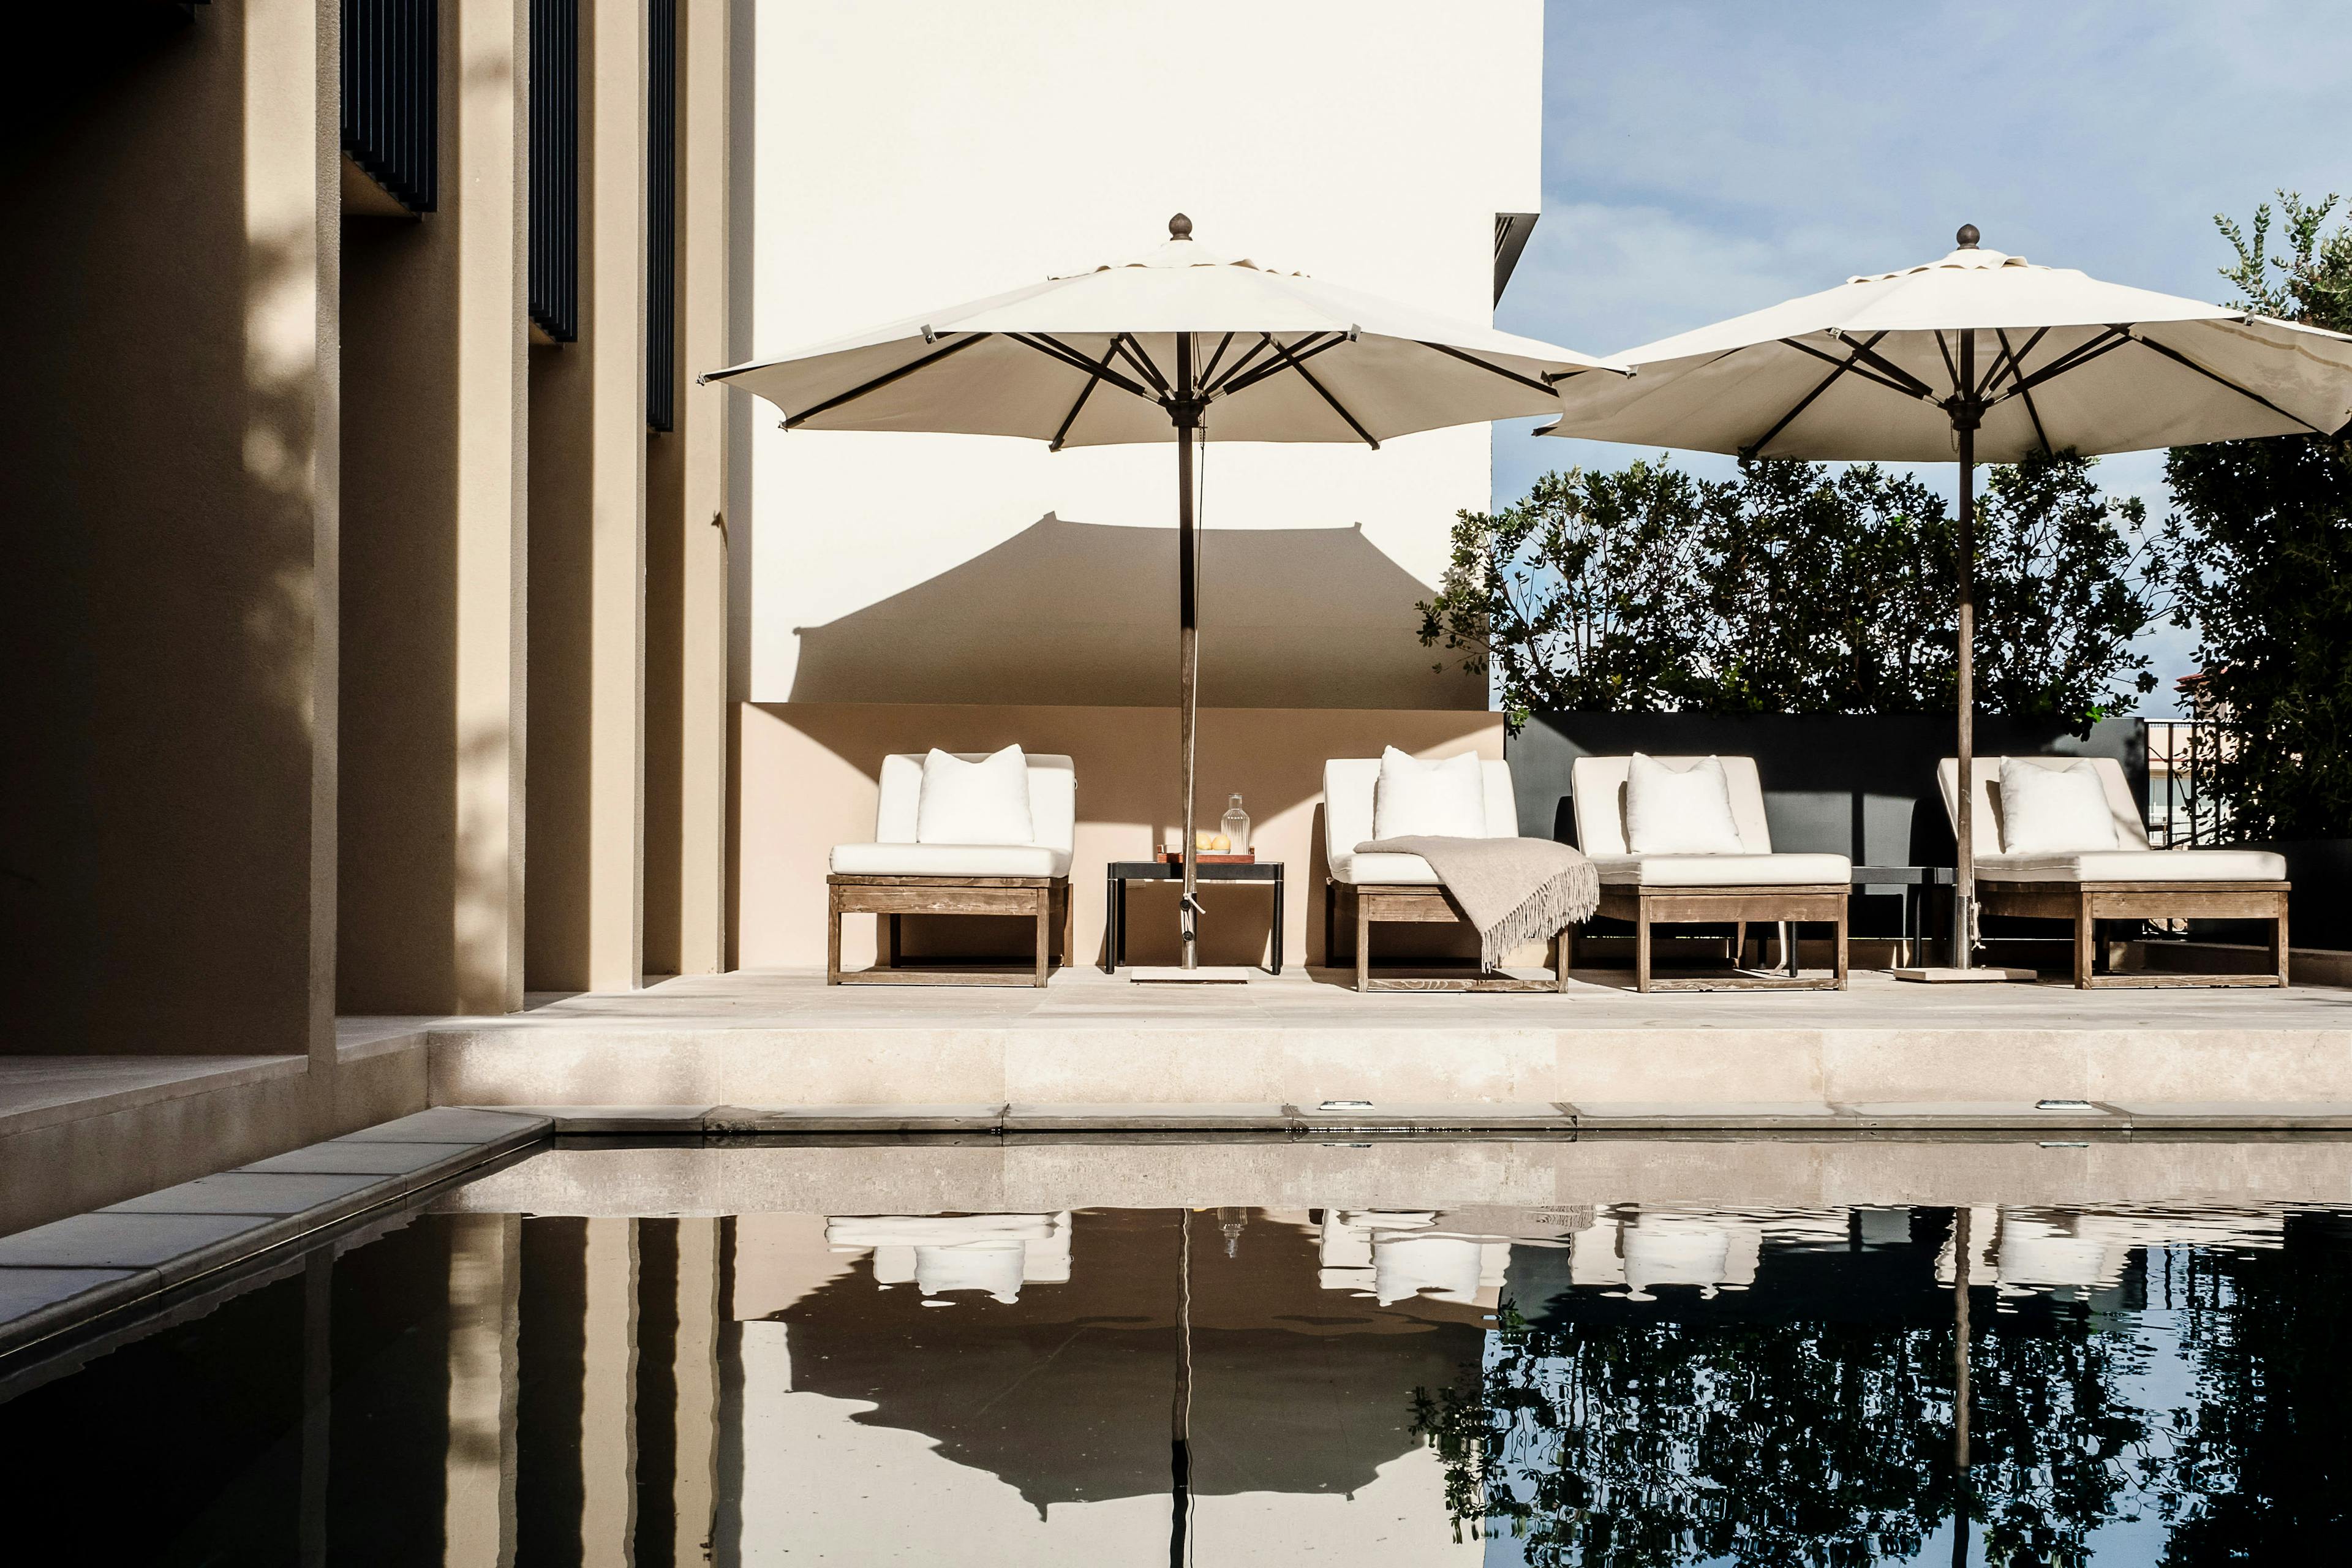 The image features a large swimming pool with a reflective surface, surrounded by a large number of white umbrellas. There are at least 12 umbrellas of various sizes and shapes, providing shade for the poolside area. The pool is also adorned with chairs and a dining table, creating a relaxing and inviting atmosphere for guests.